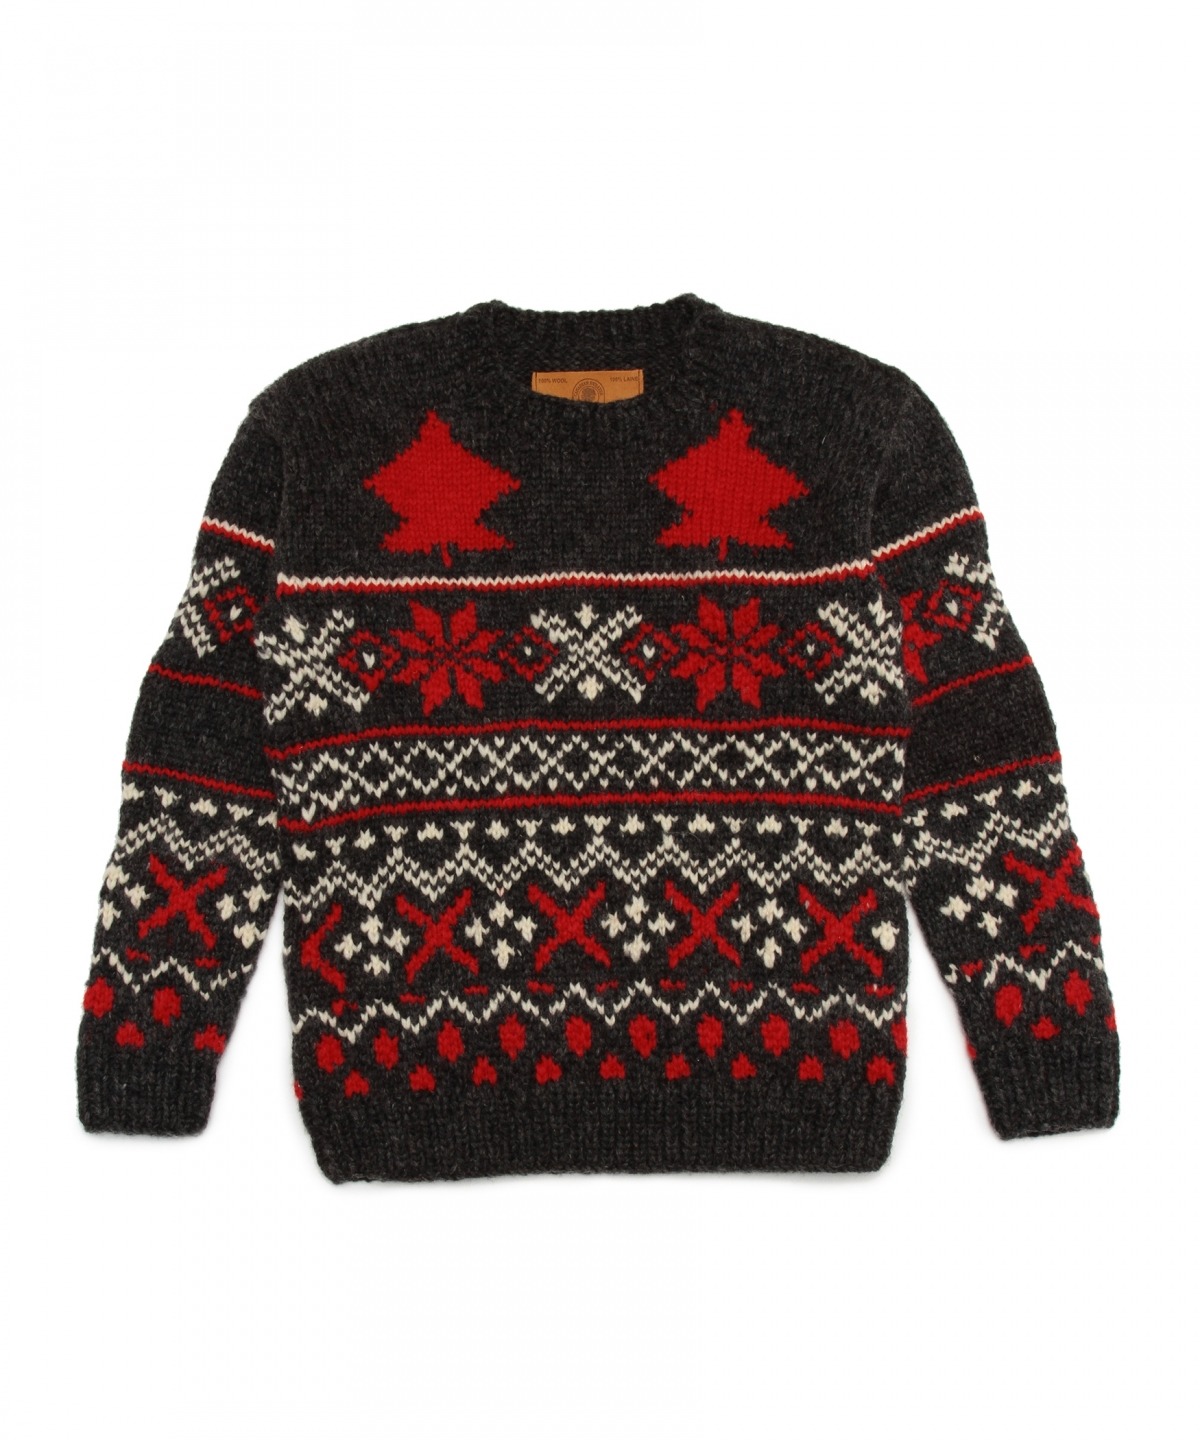 Q and Answer: Non-Ironic Holiday Sweaters?